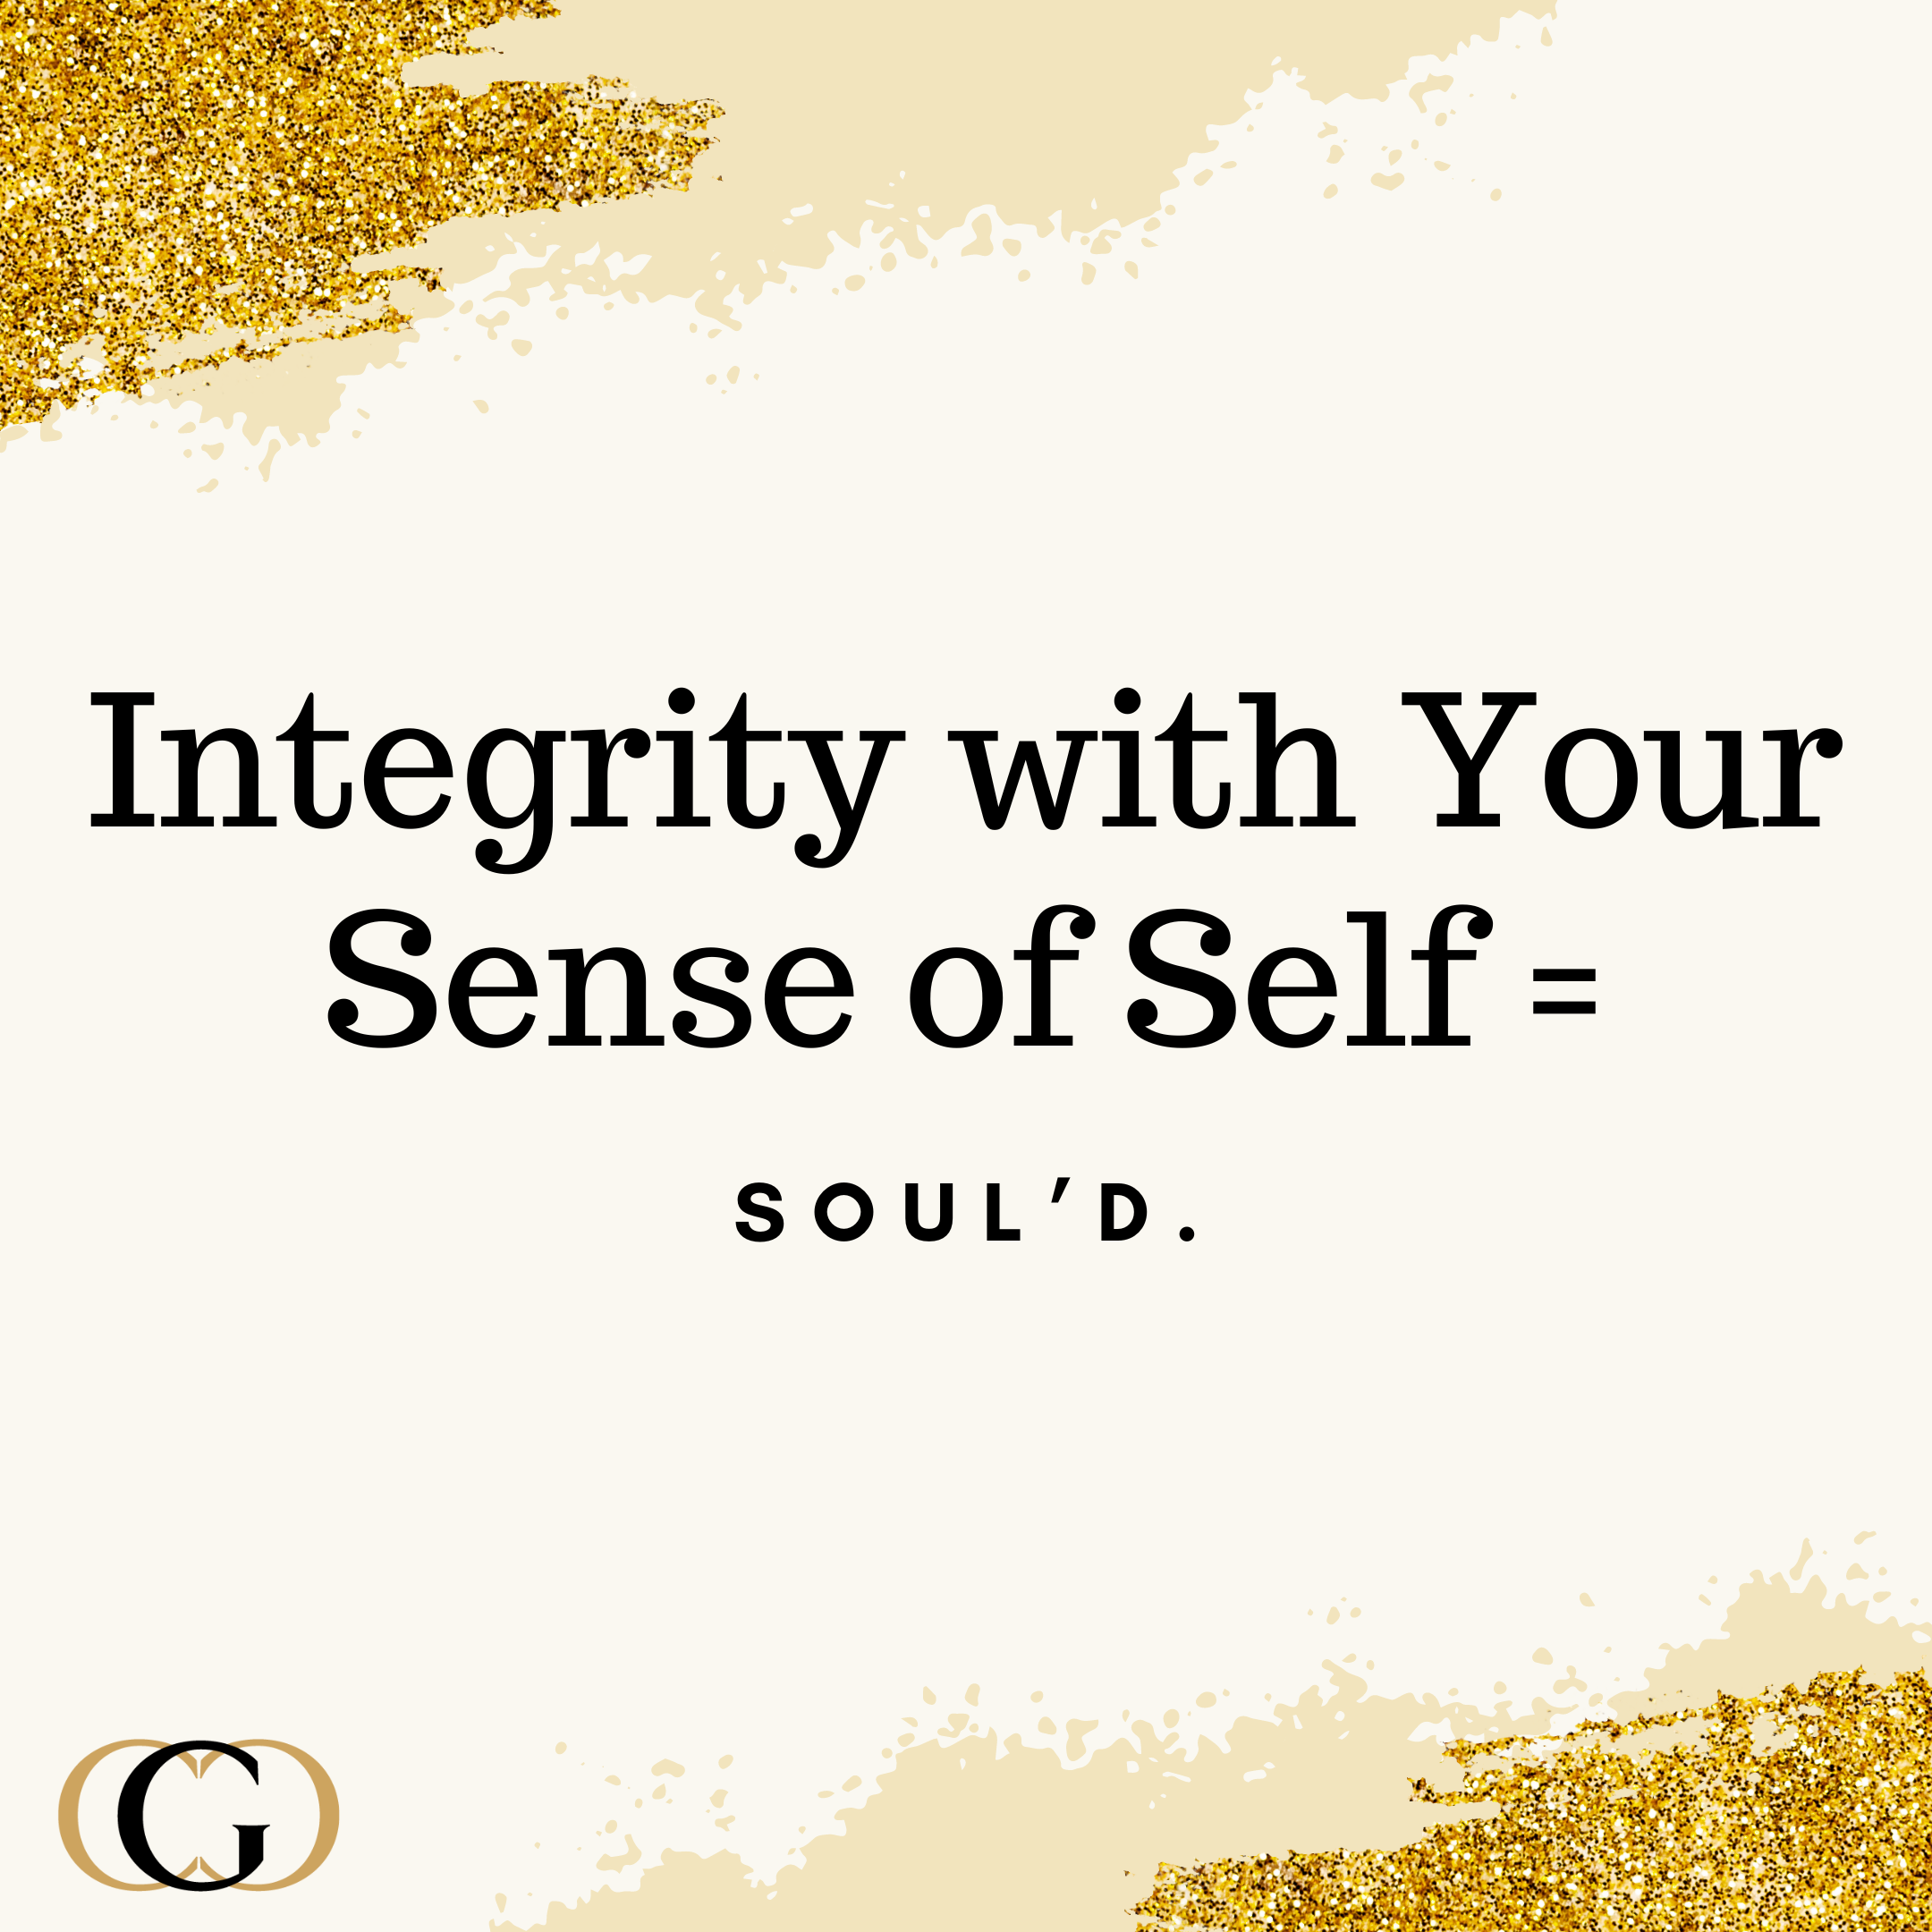 Integrity with Your Sense of Self = Soul'd